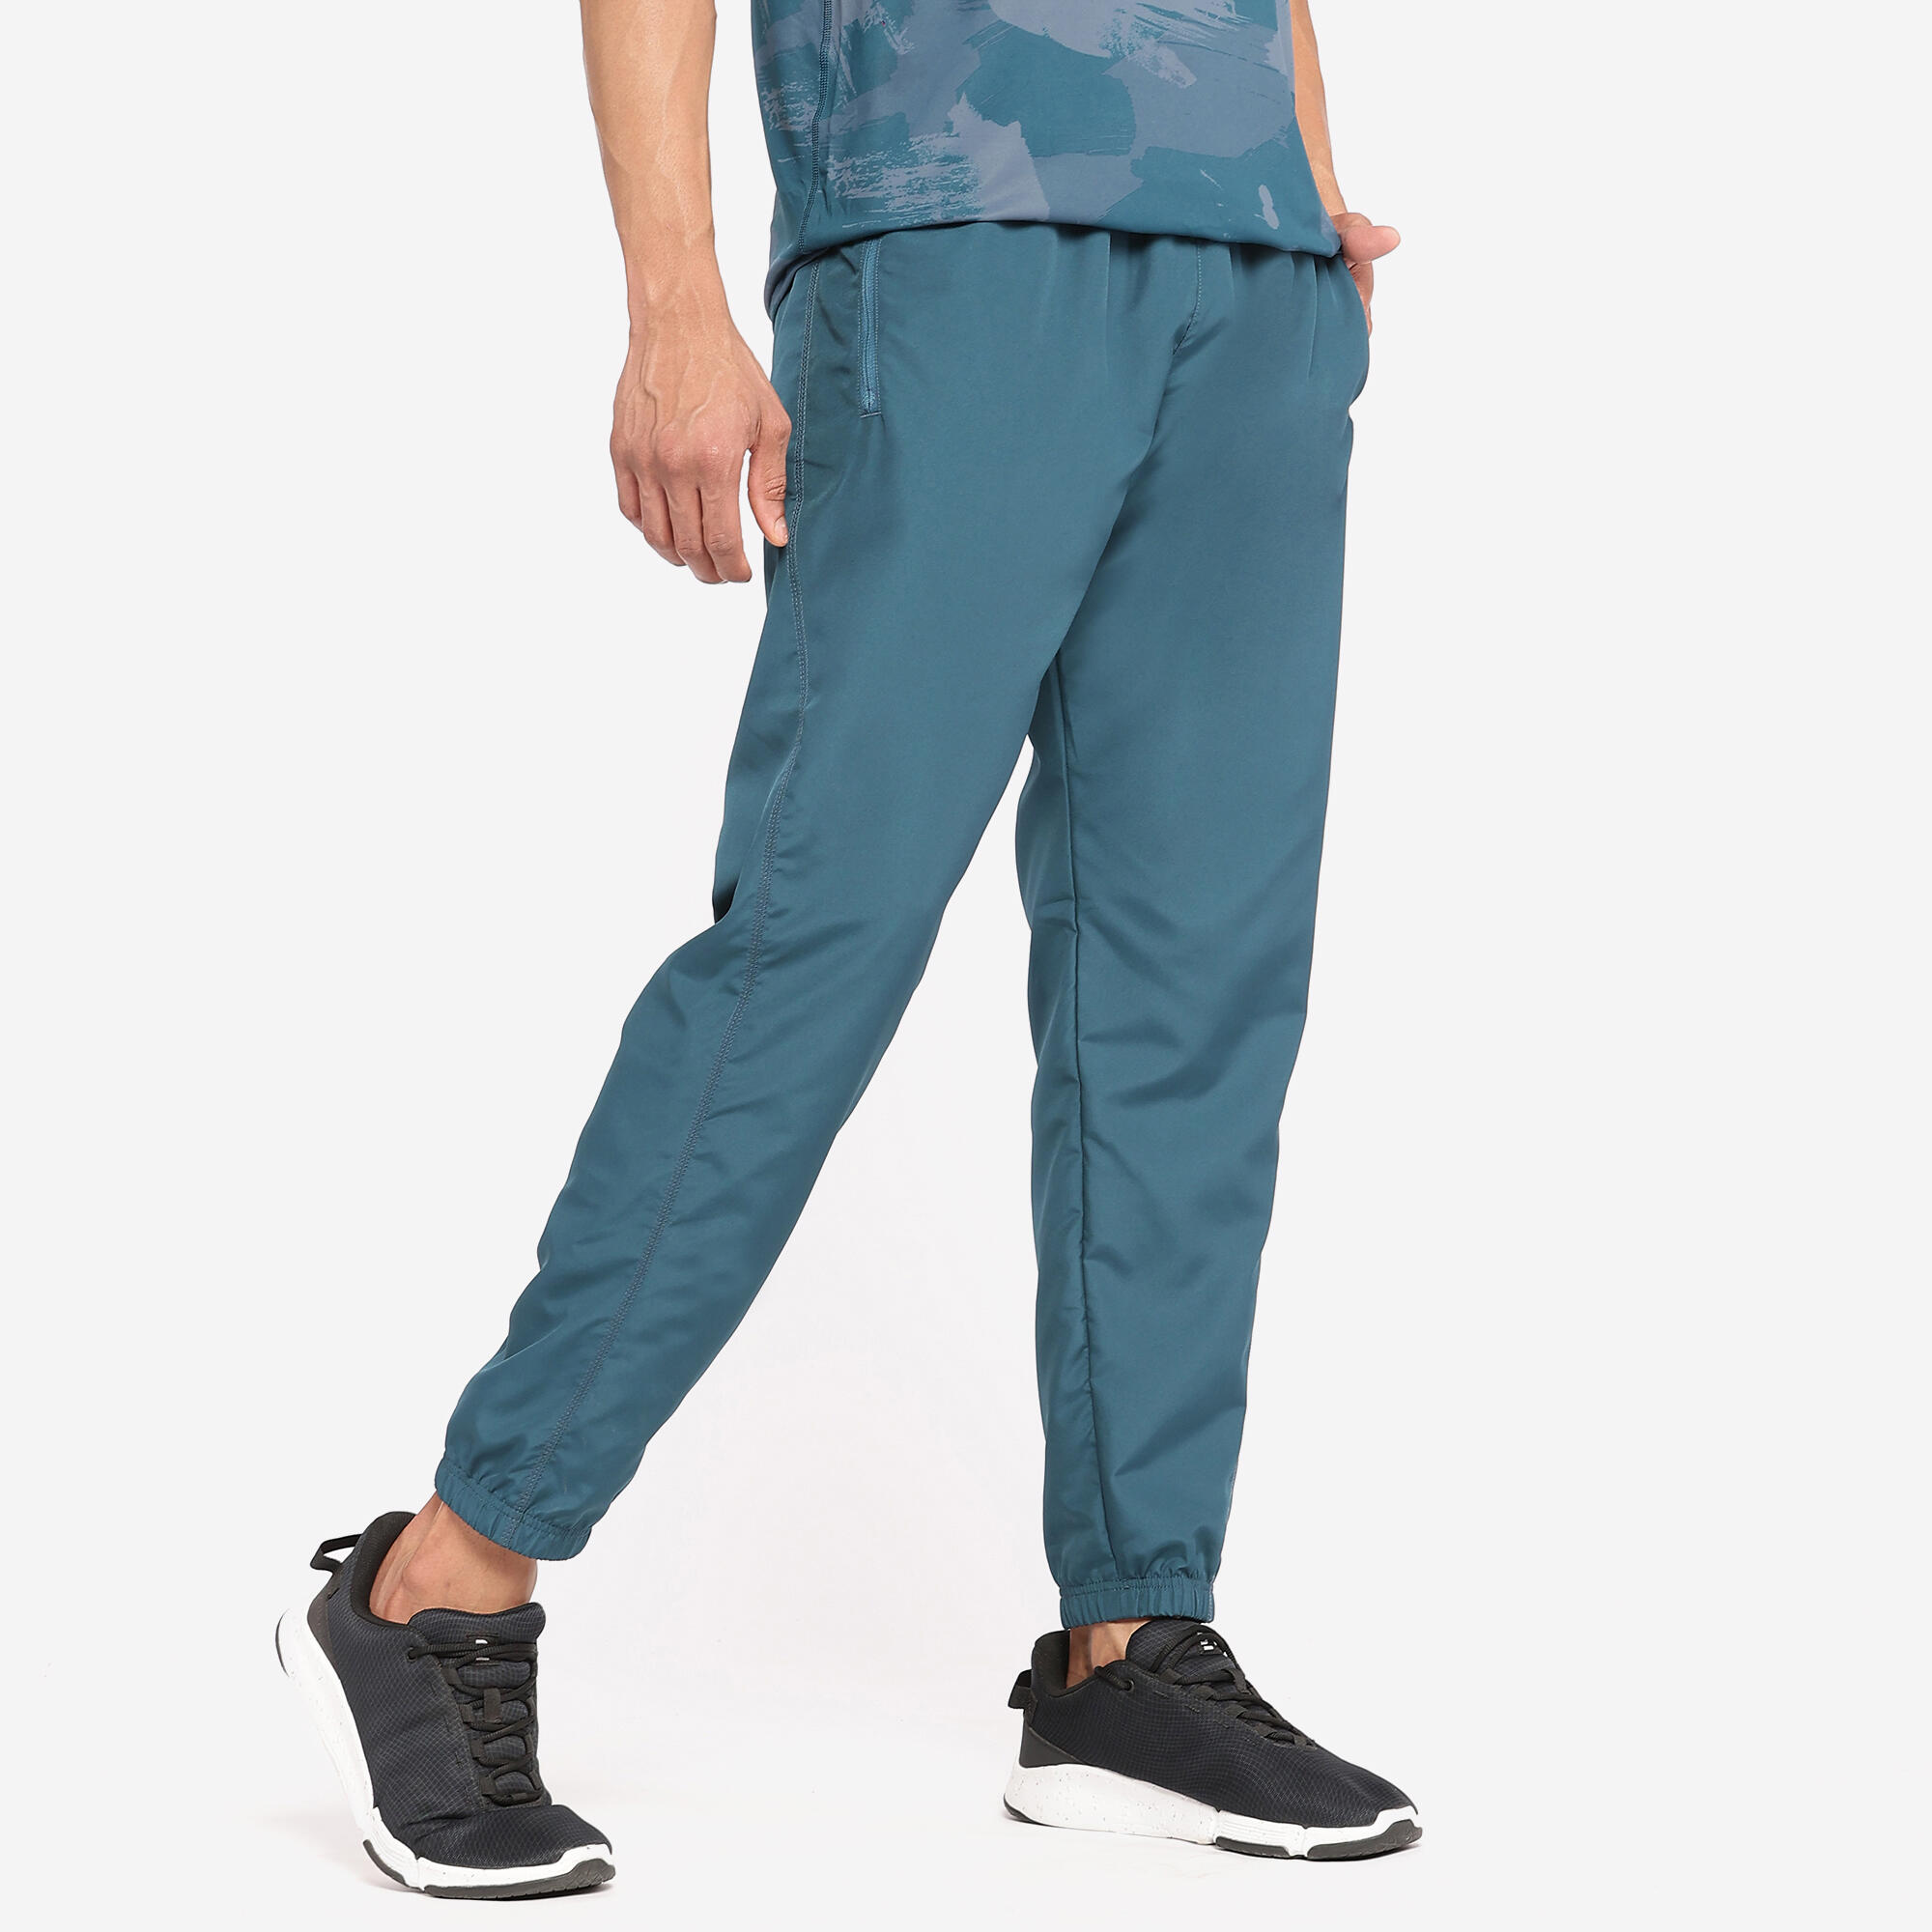 Comfortable And Regular Fit Polyester Lower Track Pant For Men Age Group:  Adults at Best Price in New Delhi | Kgn Clothing